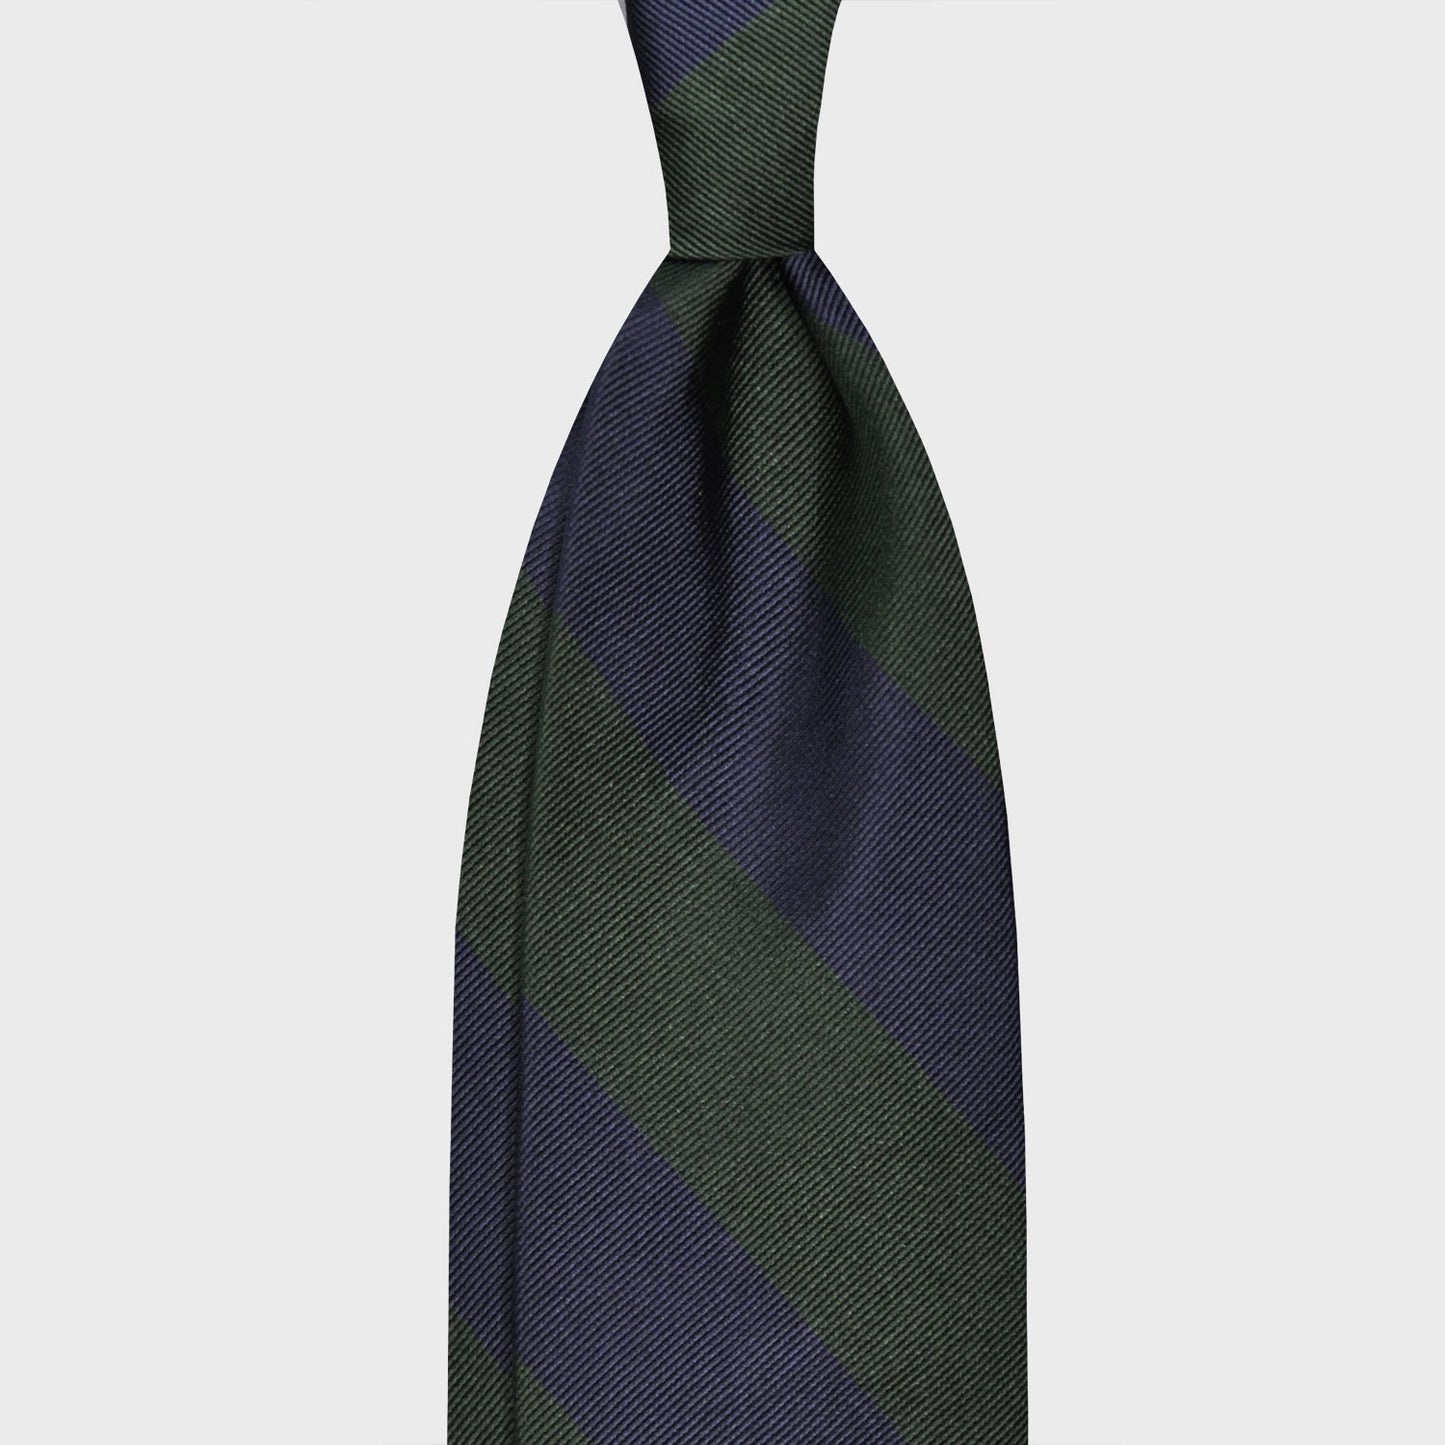 Pine Green Wide Striped Regimental Jacquard Silk Tie. Classic jacquard silk tie with wide striped pine green and navy blue, handmade in Italy by F.Marino Napoli exclusive for Wools Boutique Uomo, unlined regimental red tie 3 folds hand rolled edge.